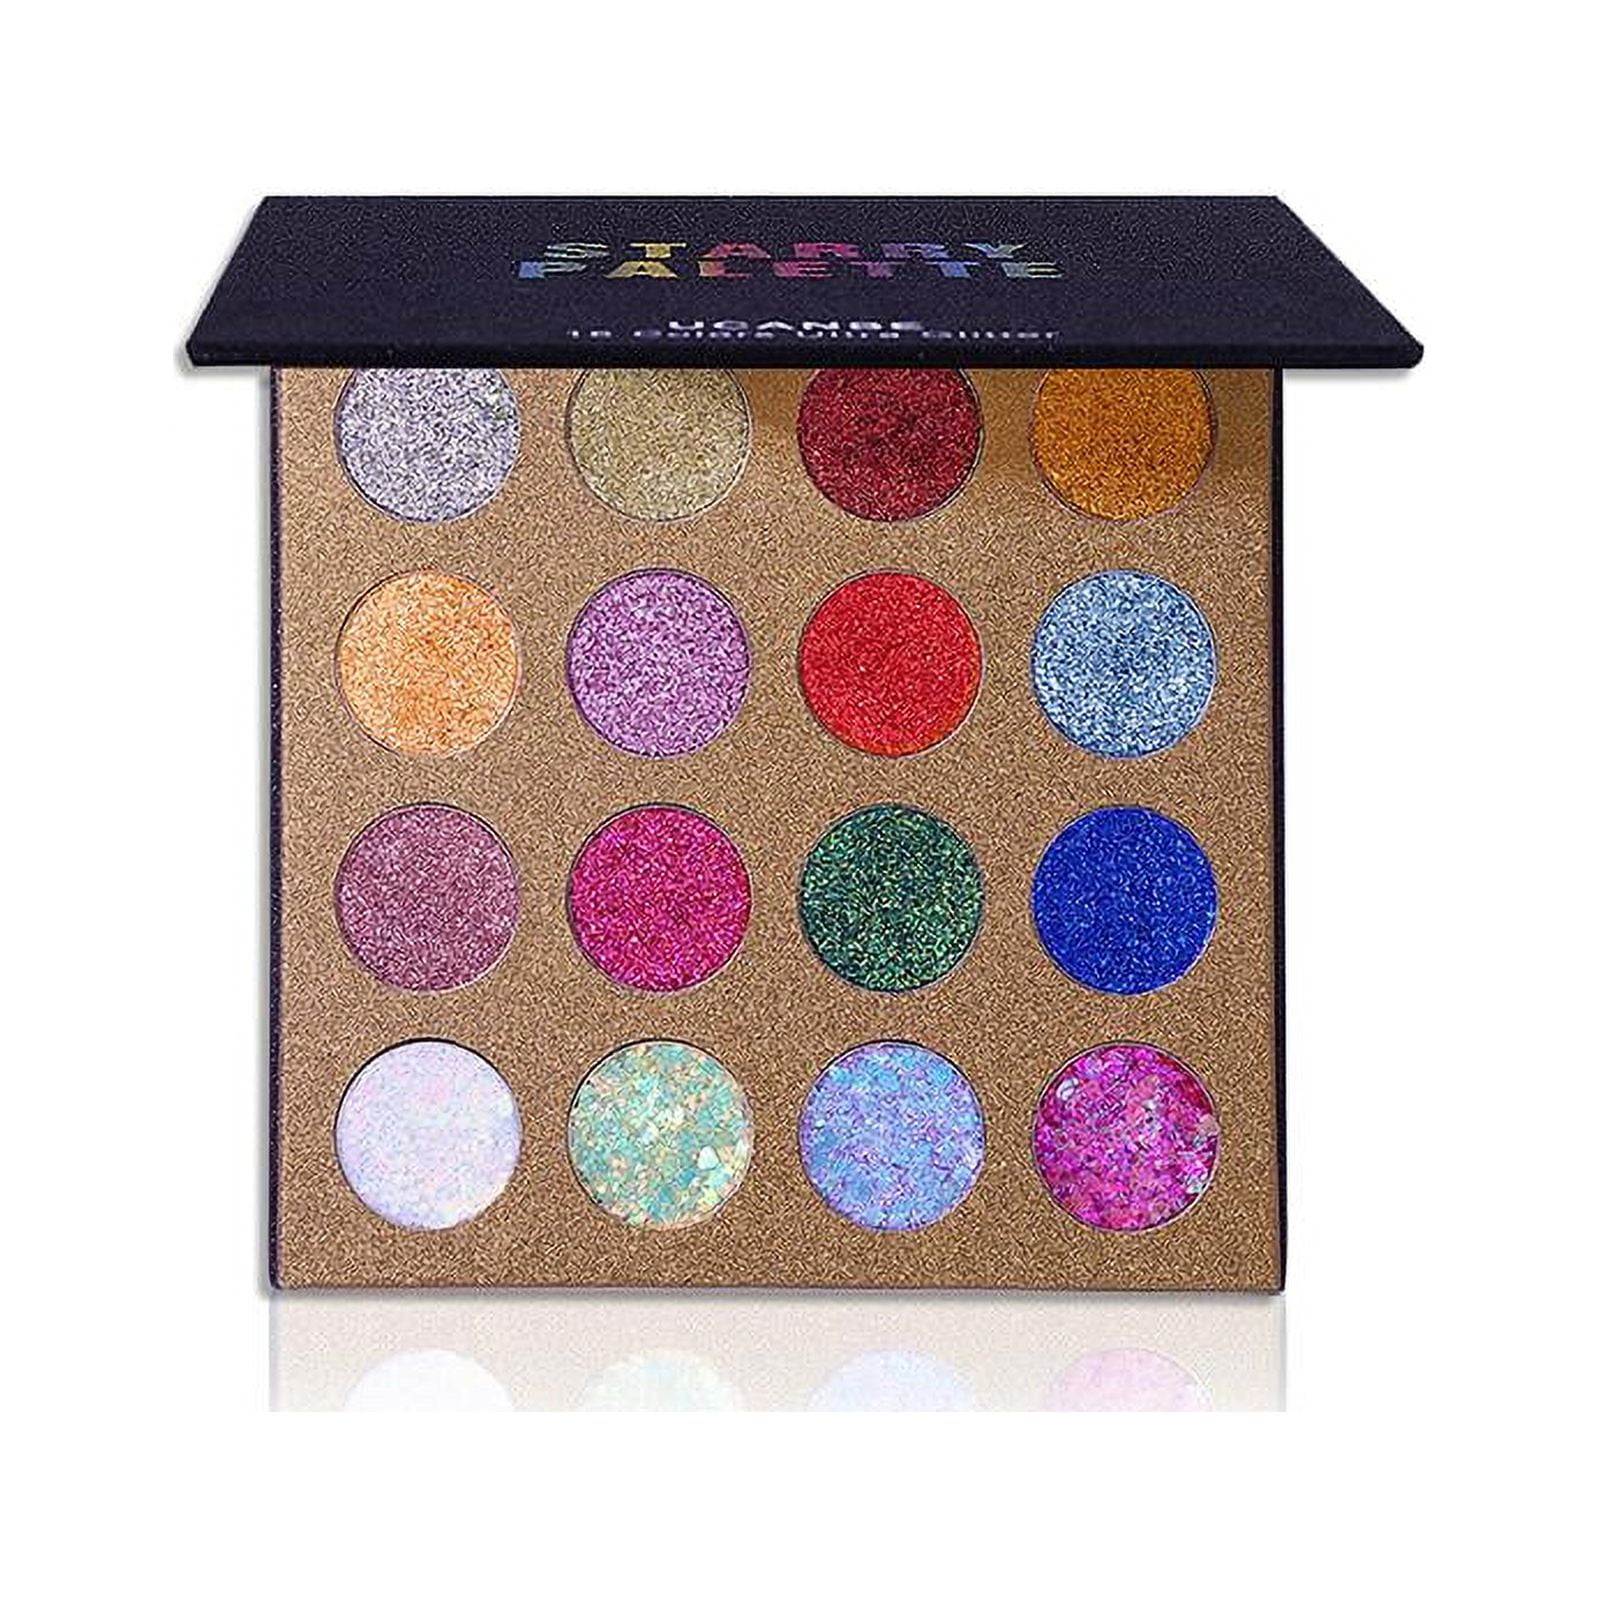 UCANBE Makeup 60 Colors Eyeshadow Palette, Highly Pigmented